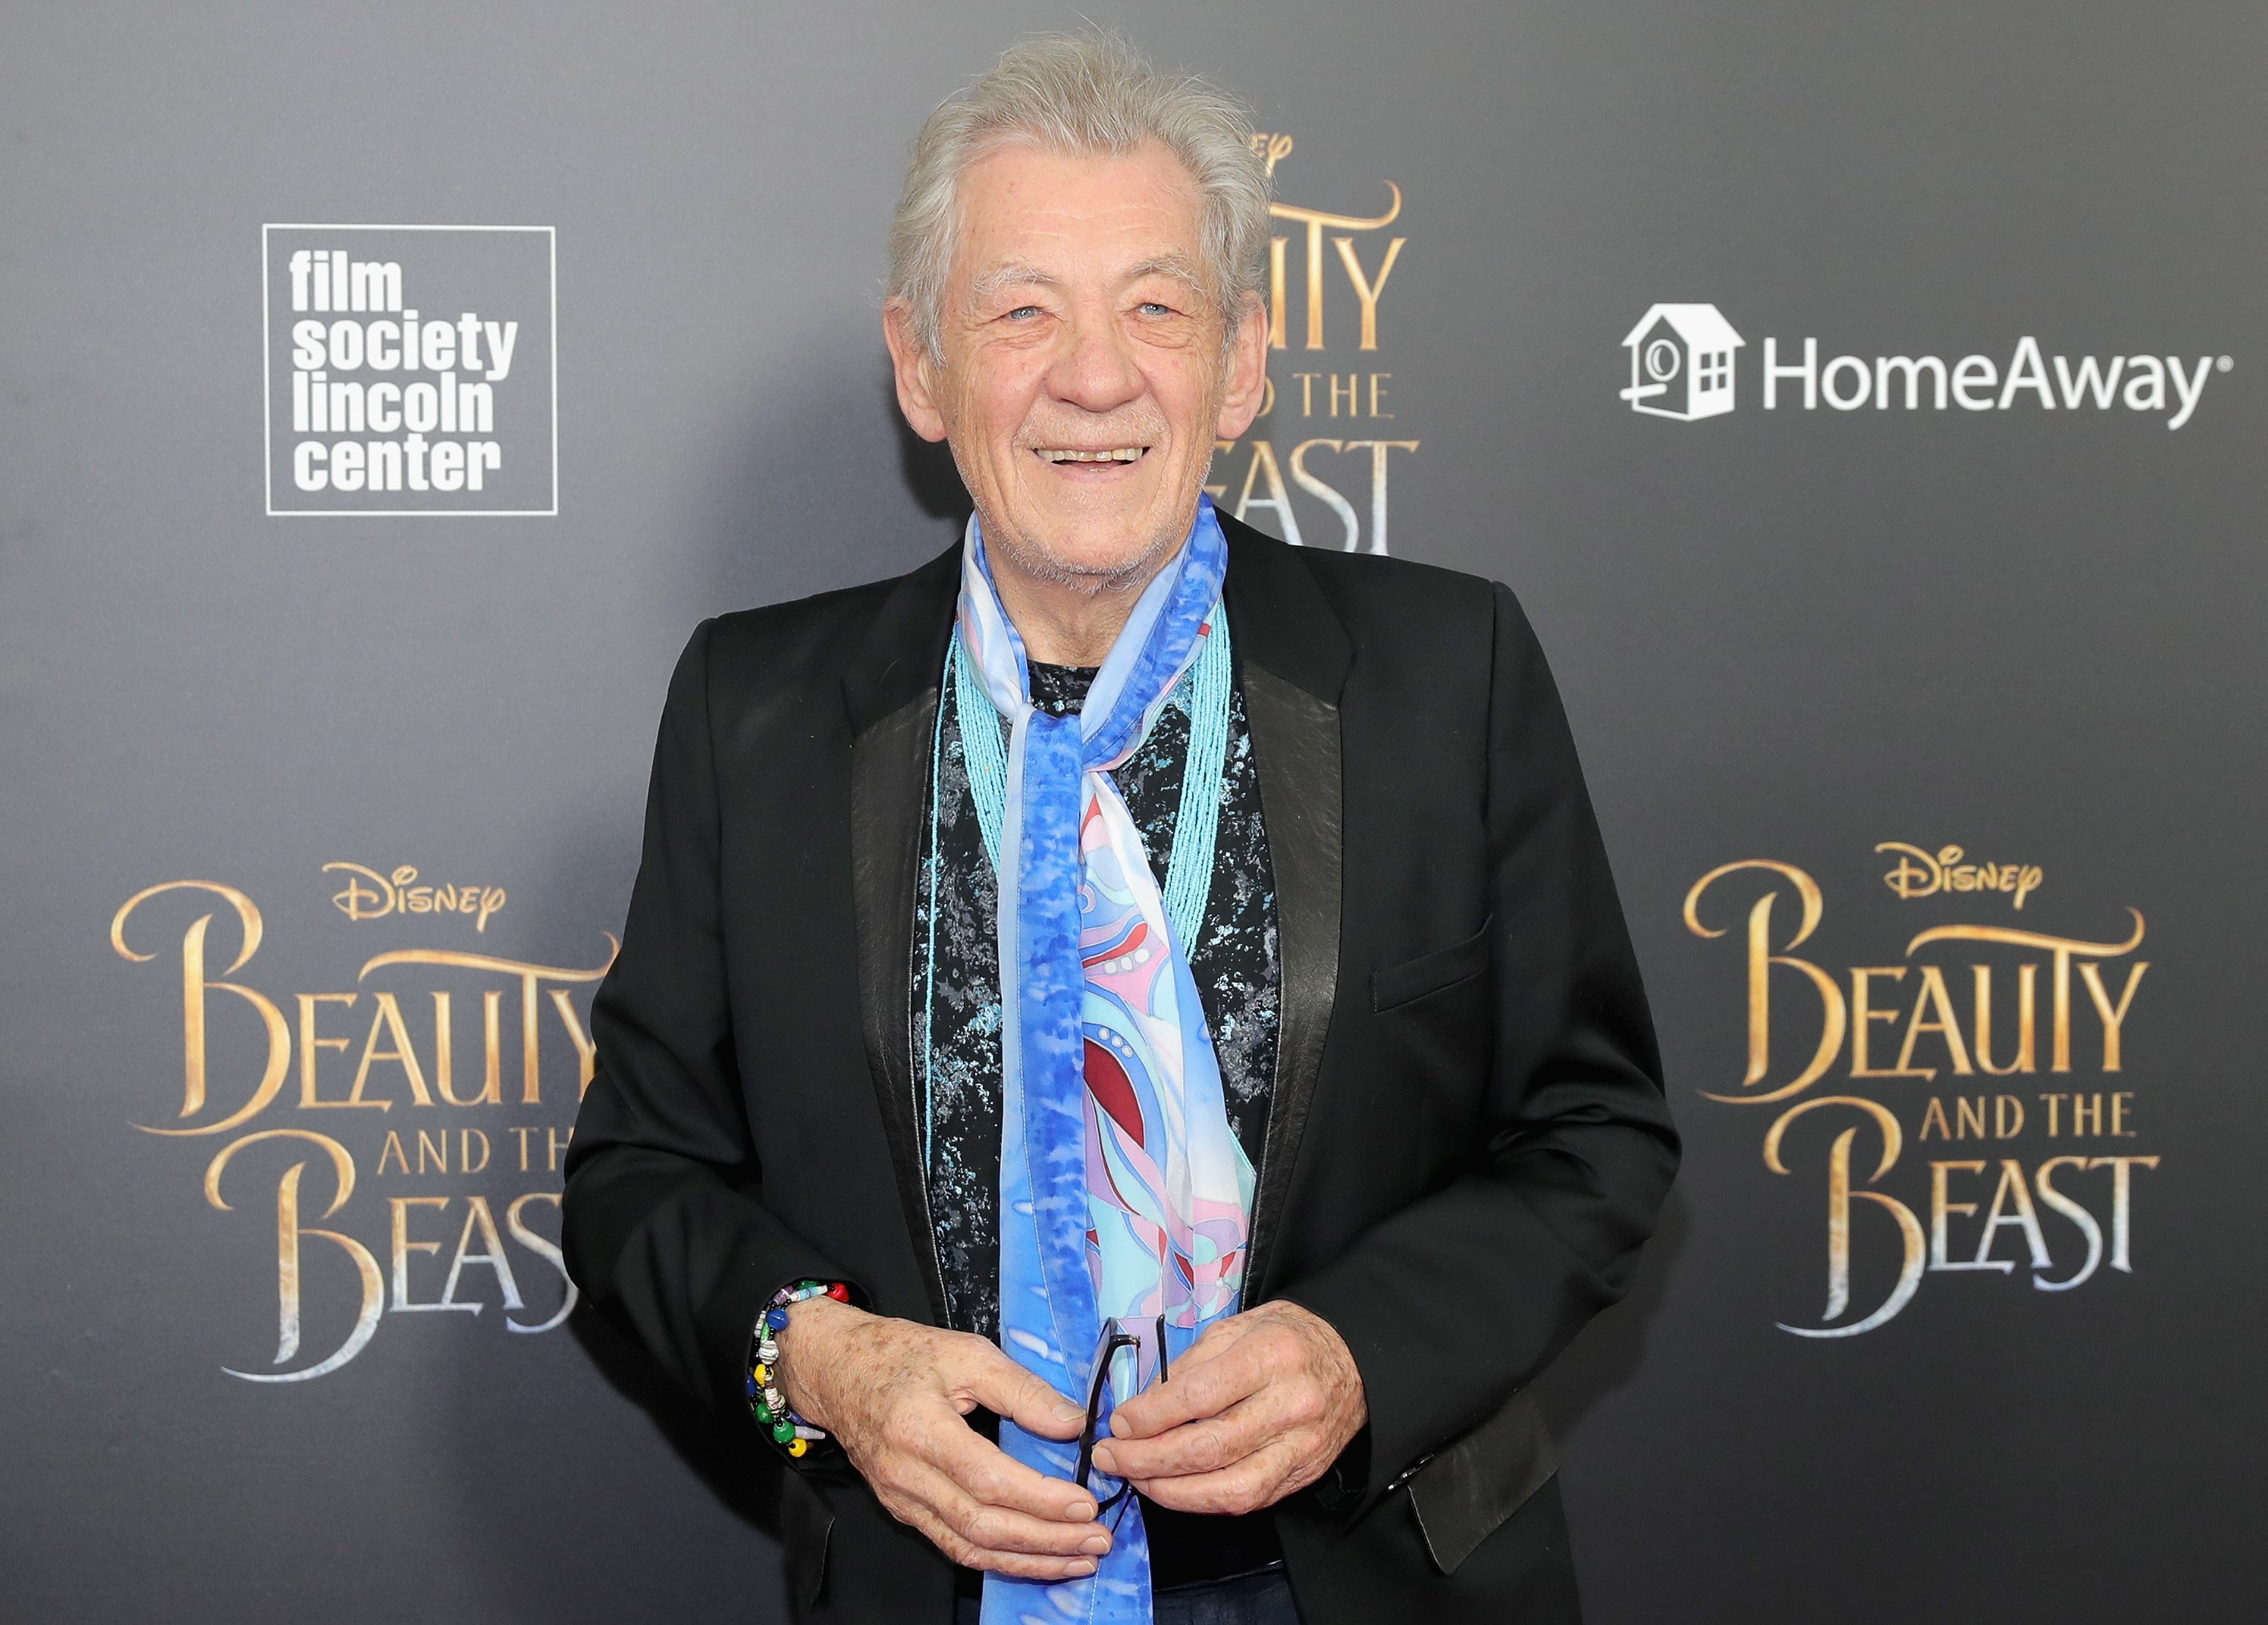 Ian McKellen attends the screening of "Beauty and the Beast" in New York City on March 13, 2017 | Photo: Getty Images